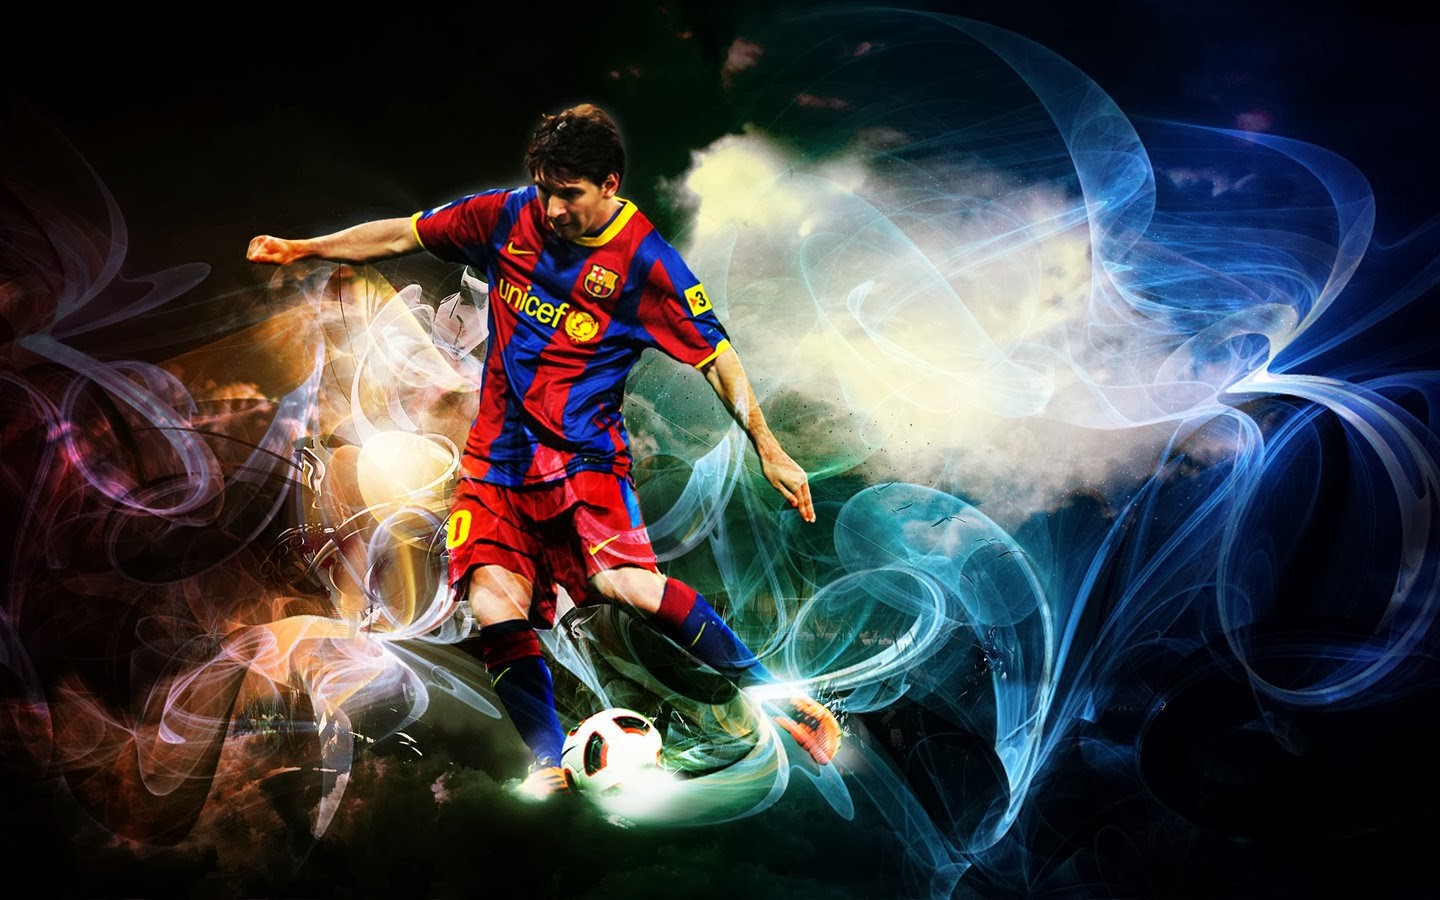 Image For Beautiful Lionel Messi Wallpaper Argentina - Messi Wallpaper Argentina 2017 - HD Wallpaper 